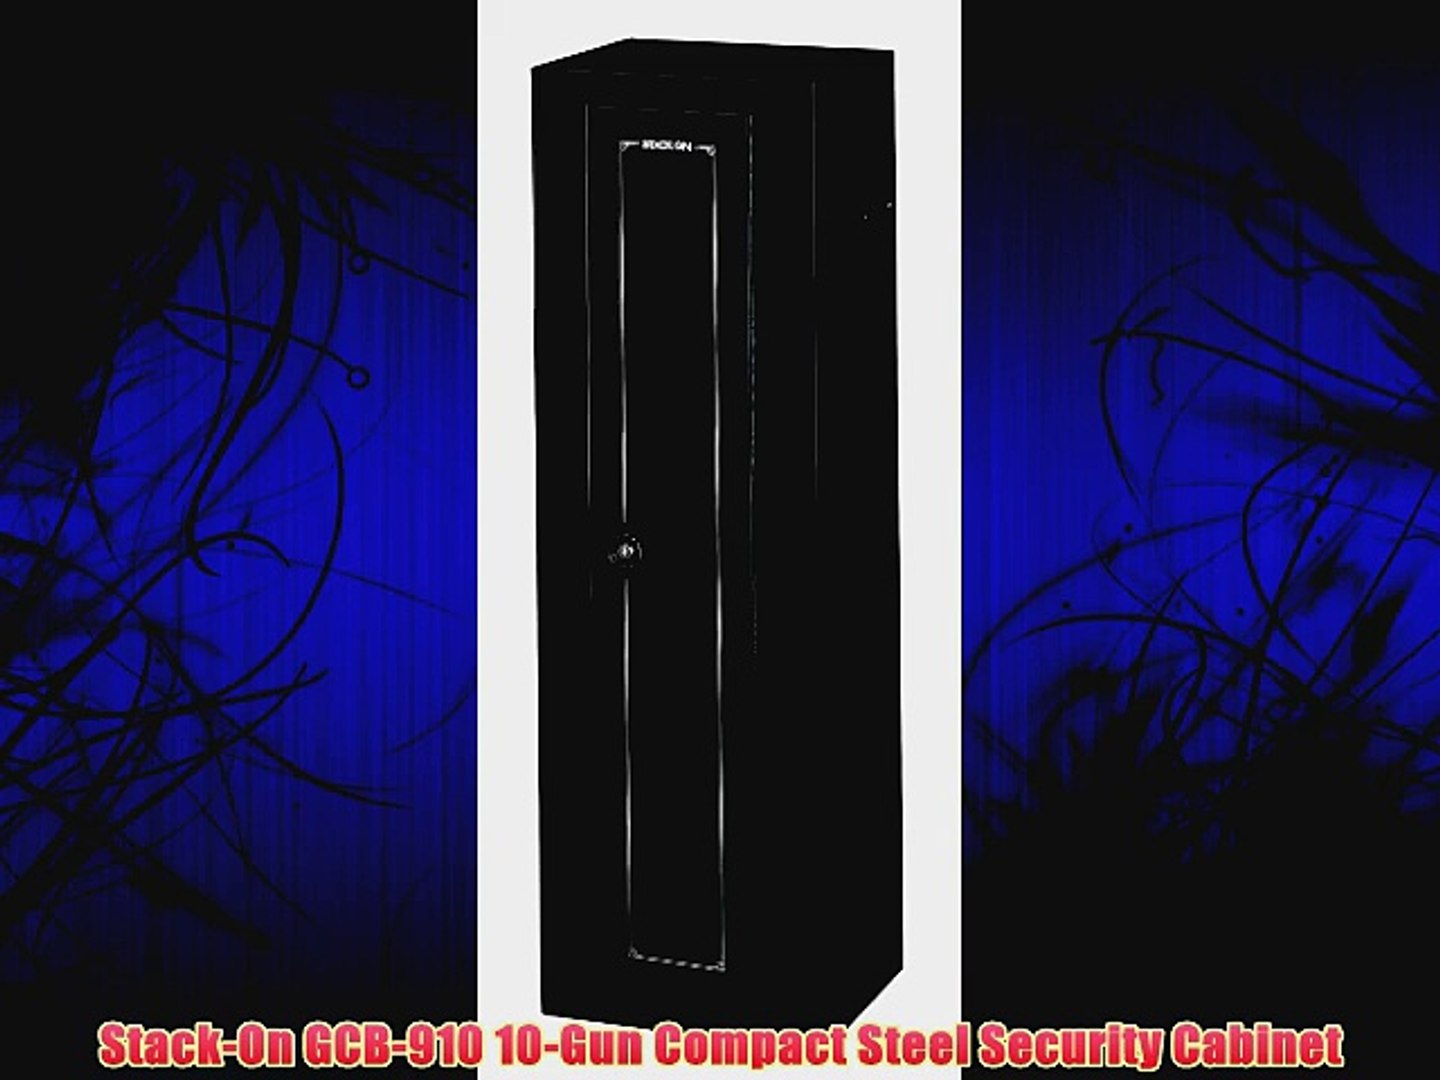 Stack On Gcb 910 10 Gun Compact Steel Security Cabinet Video